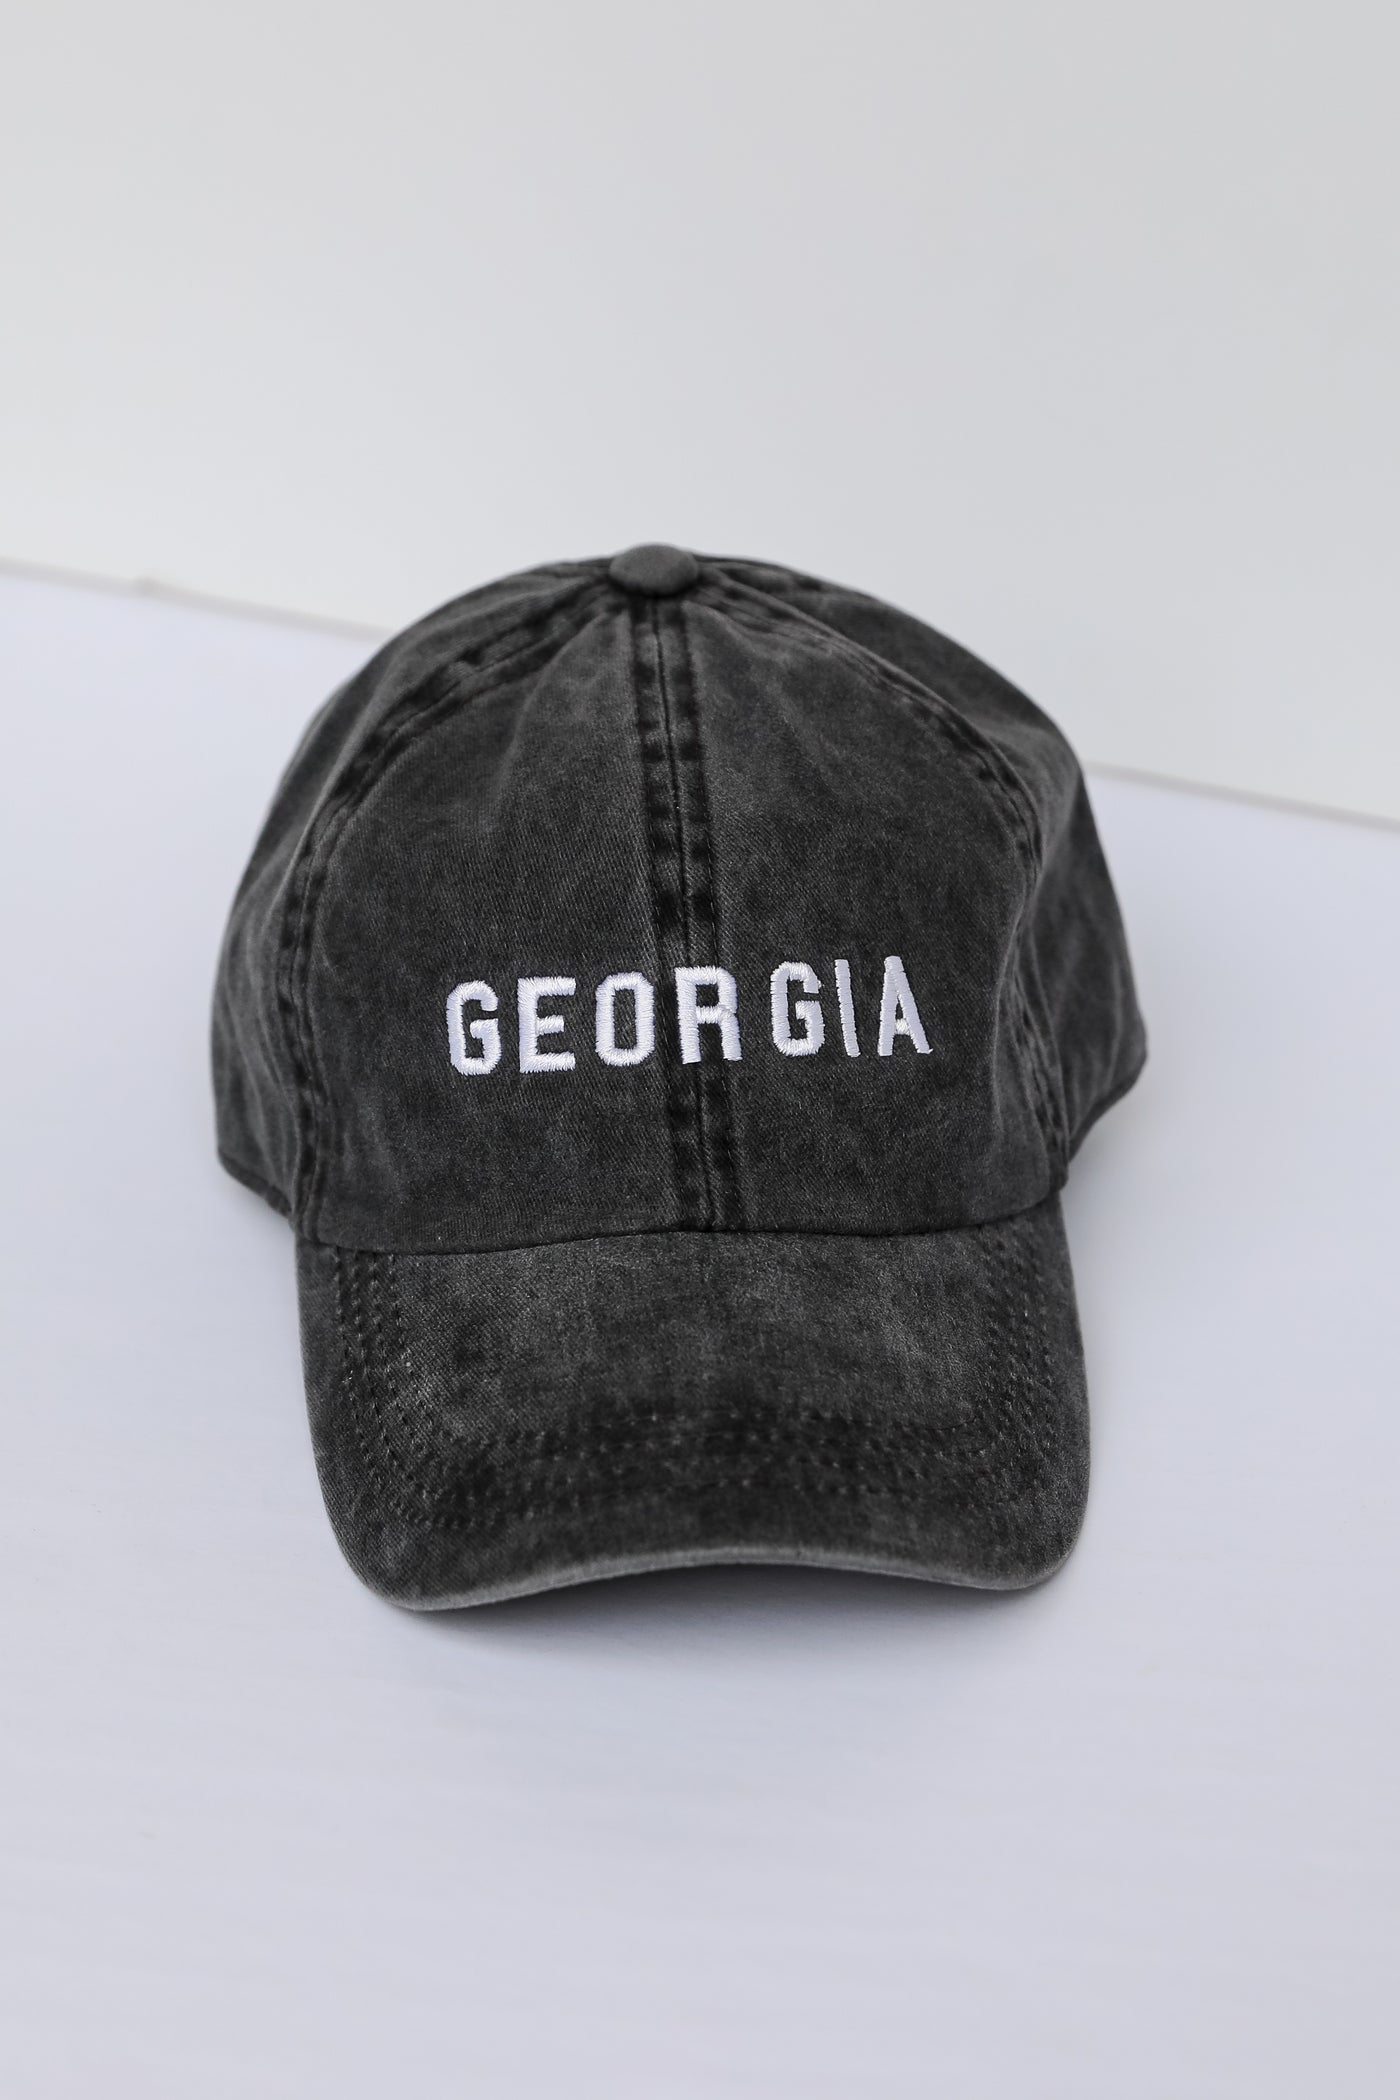 Georgia Embroidered Hat flat lay